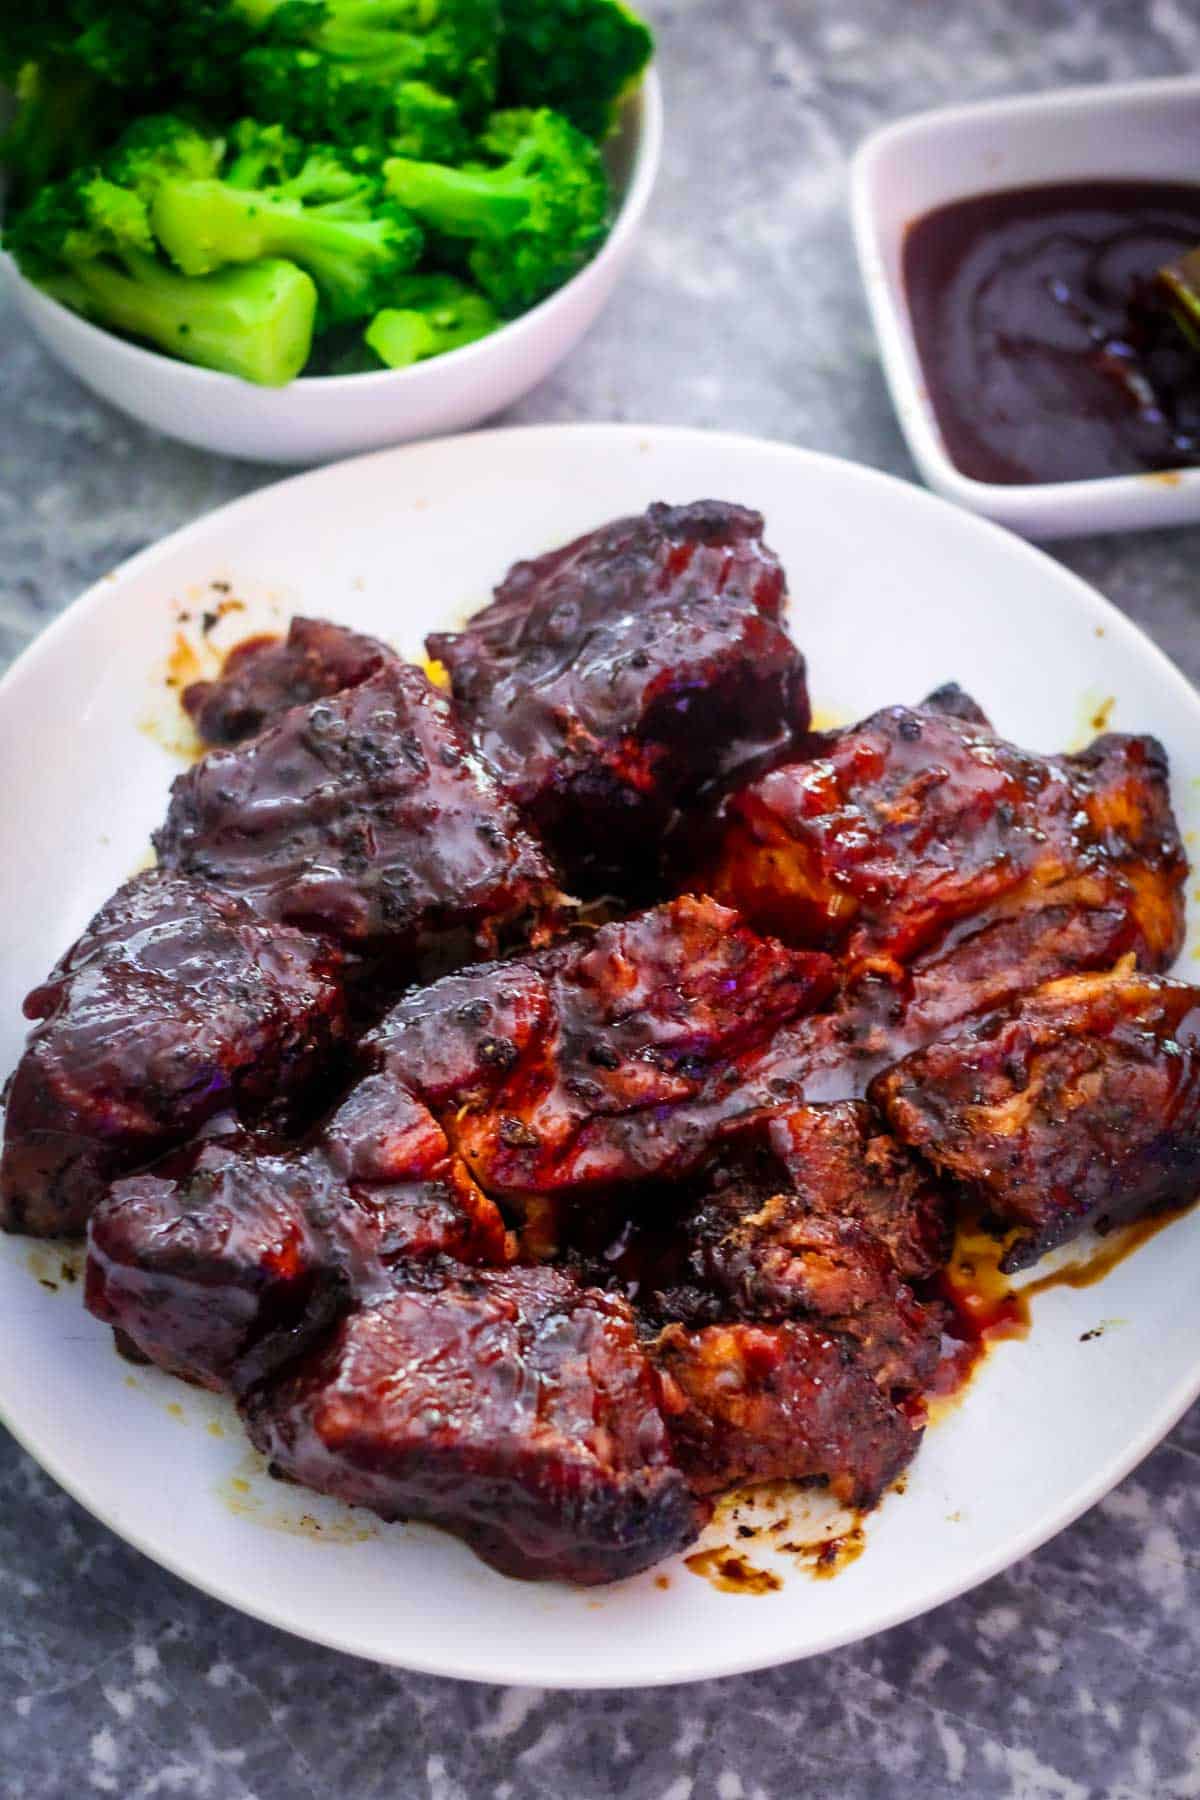 Boneless ribs slathered with bbq sauce are shown on a platter. In the background there are broccoli and more bbq sauce.